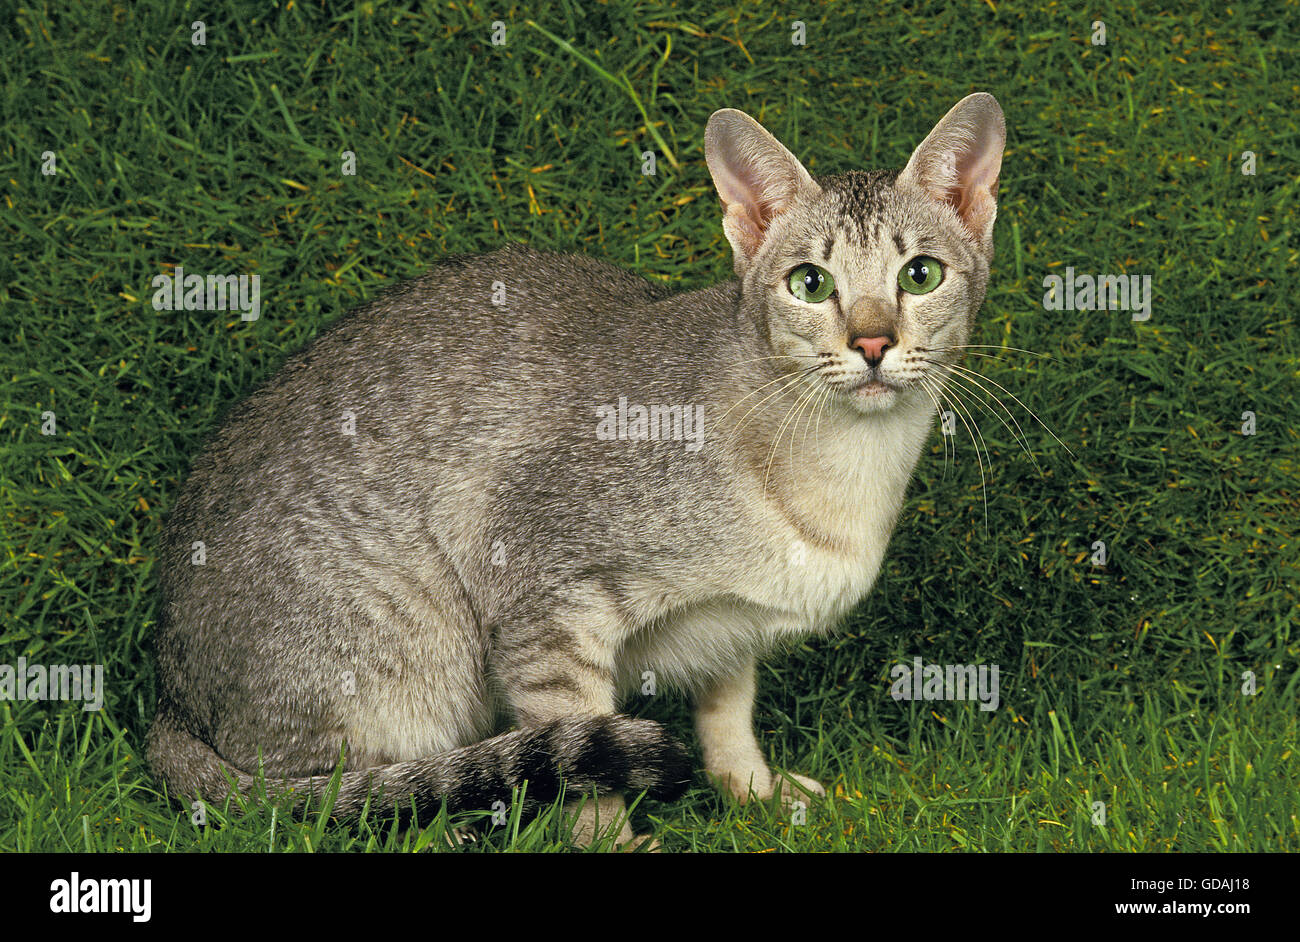 ORIENTAL DOMESTIC CAT, ADULT WITH GREEN EYES Stock Photo